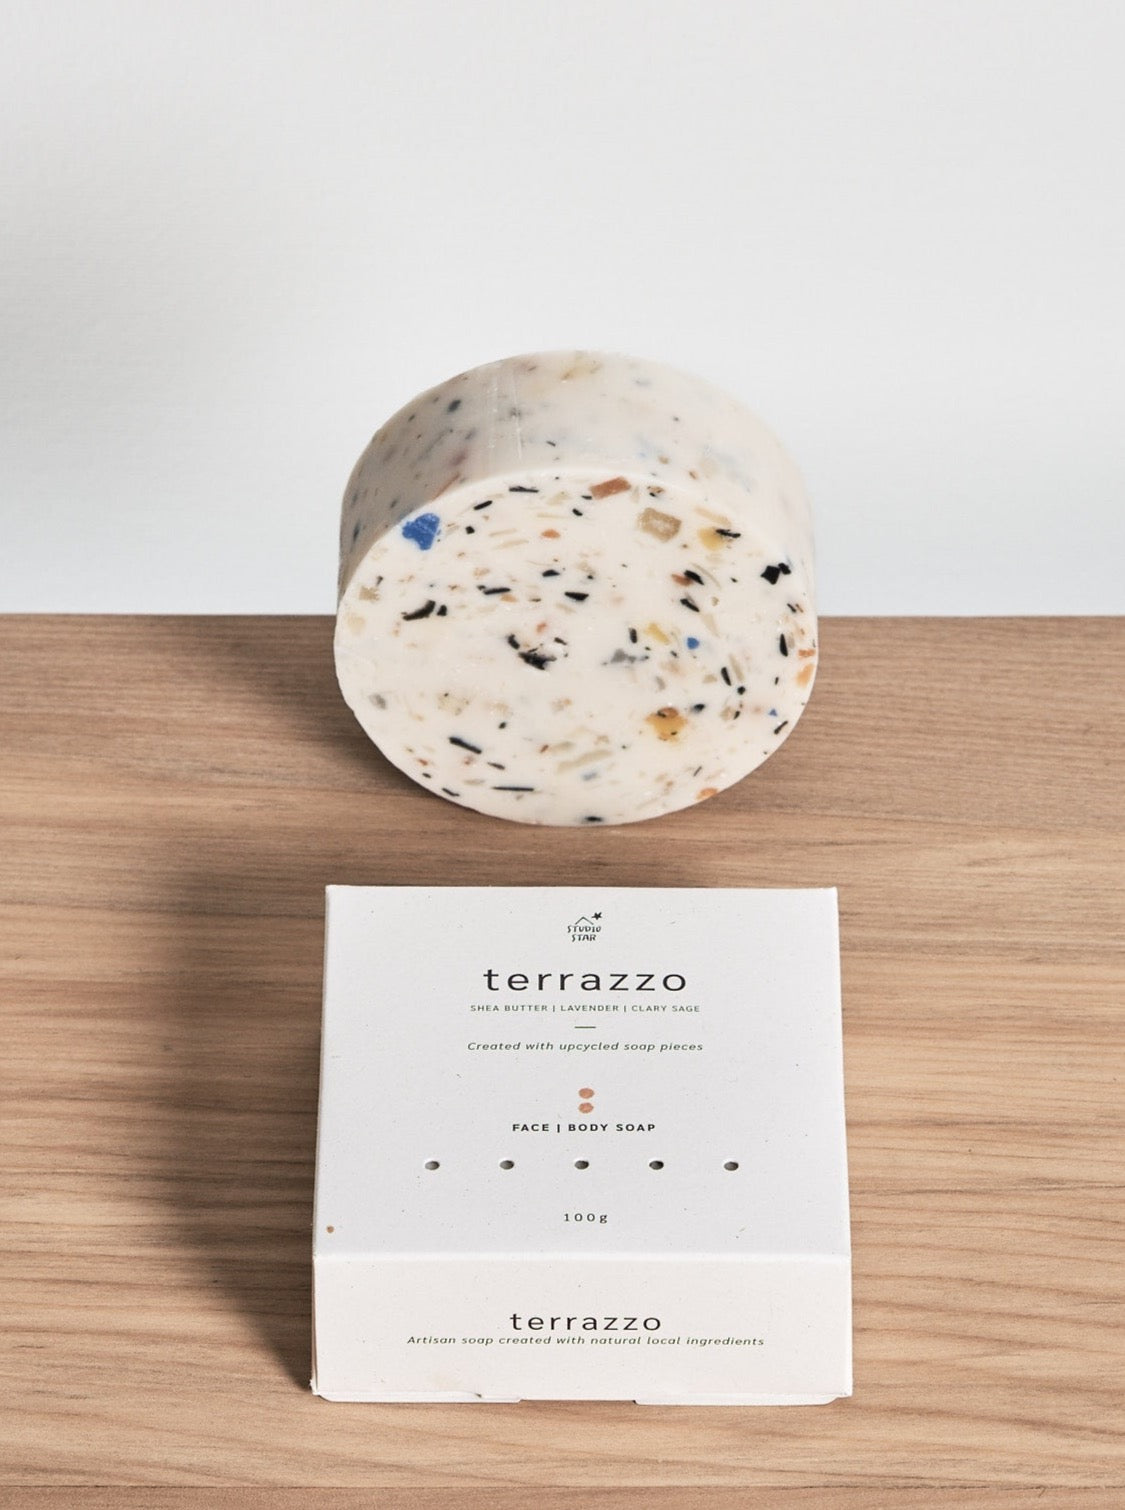 A Terrazzo Soap by Studio Star with a box next to it.